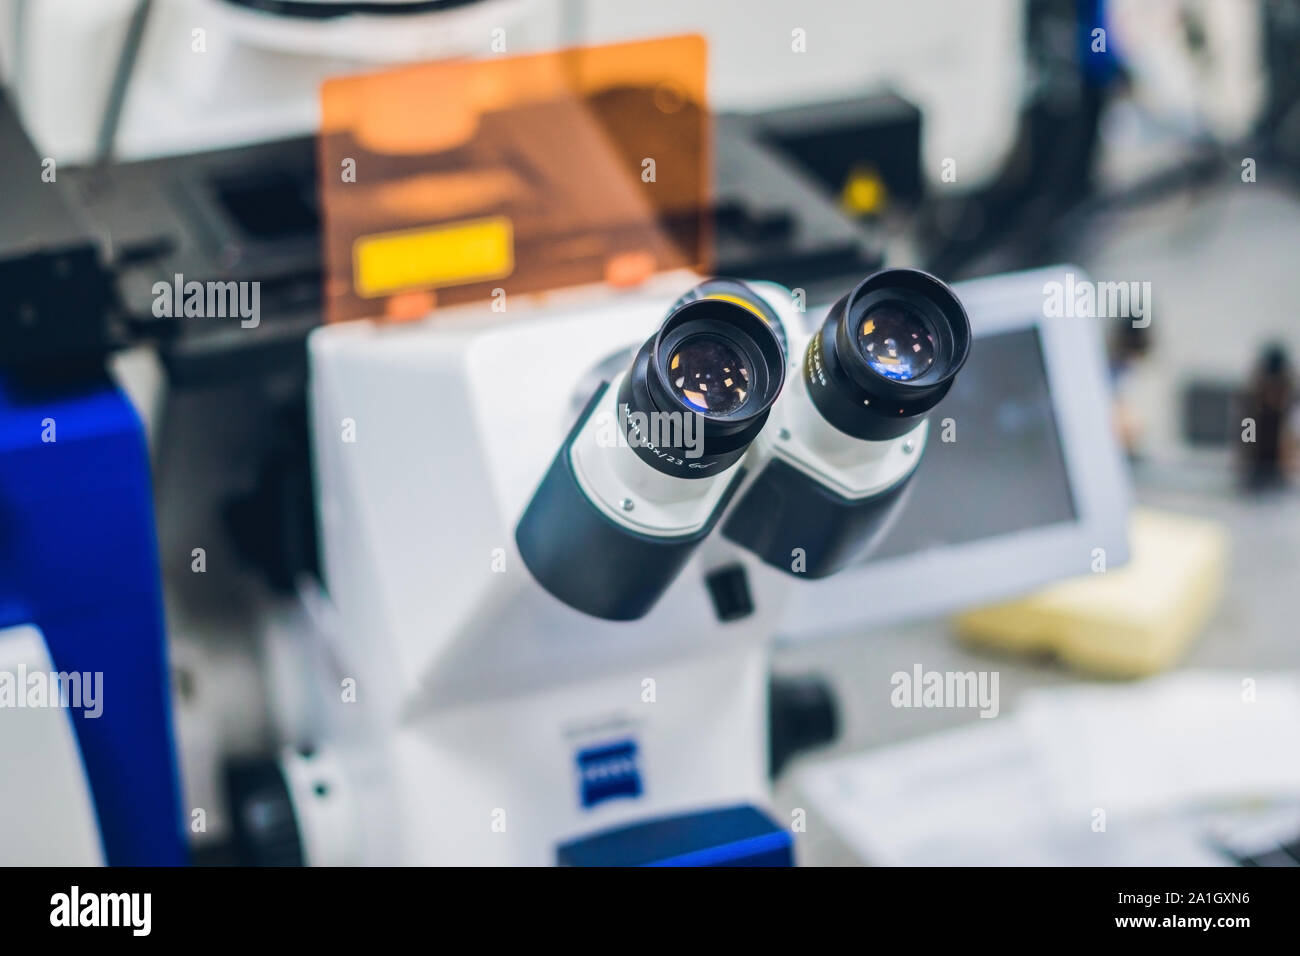 Confocal microscope in laboratory for biological samples investigation. Stock Photo